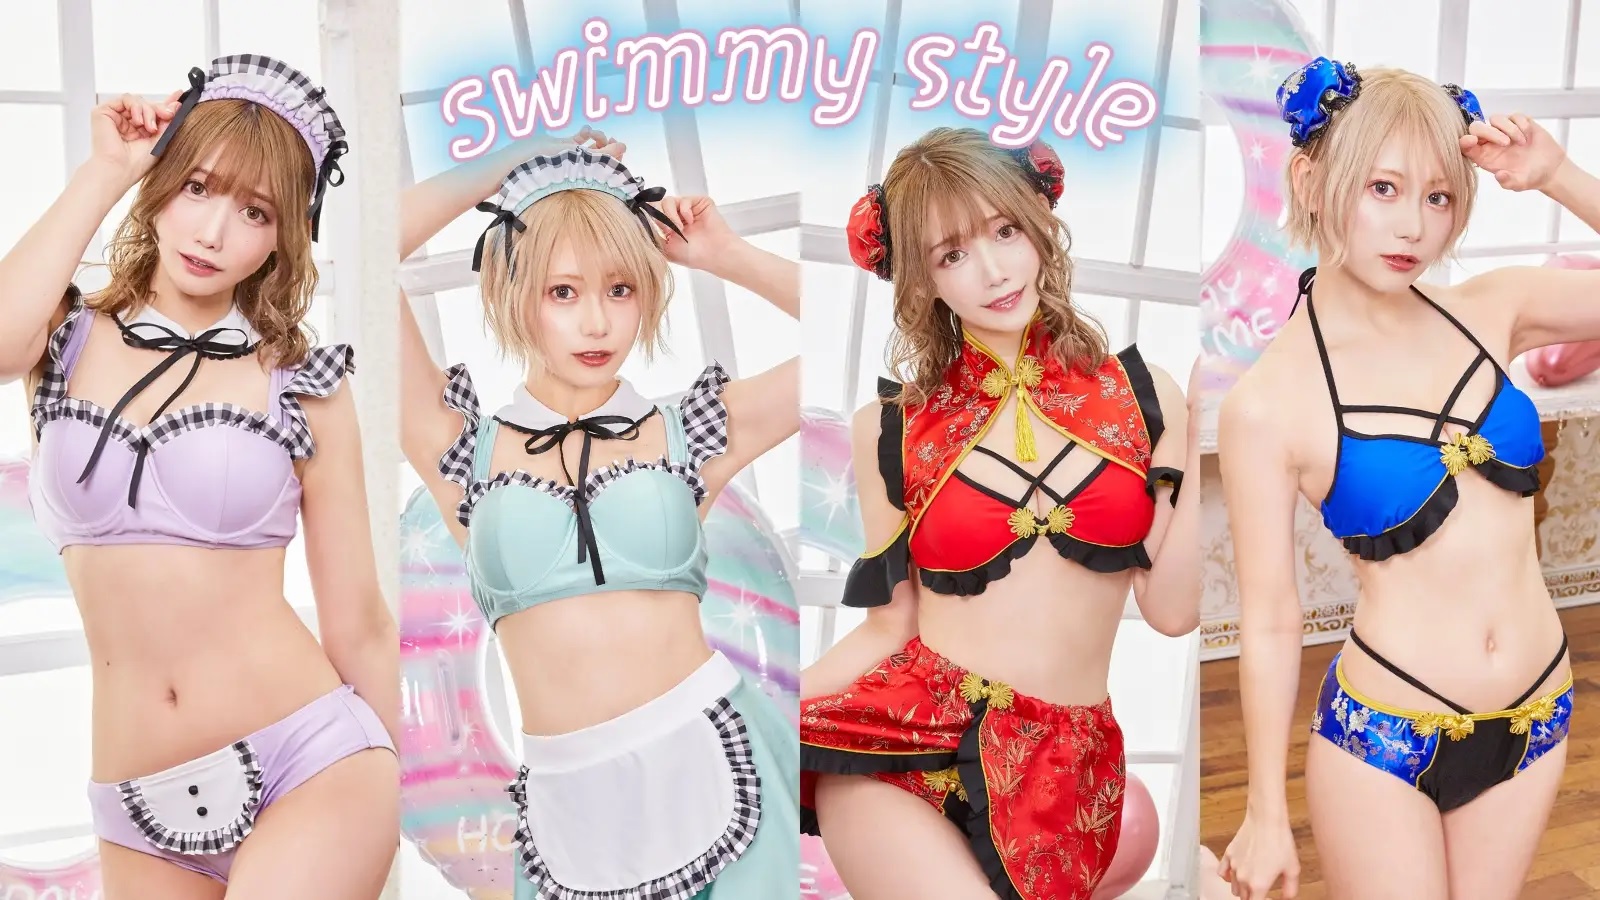 Tokyo cosplay company releases cosplay swimsuits in time for